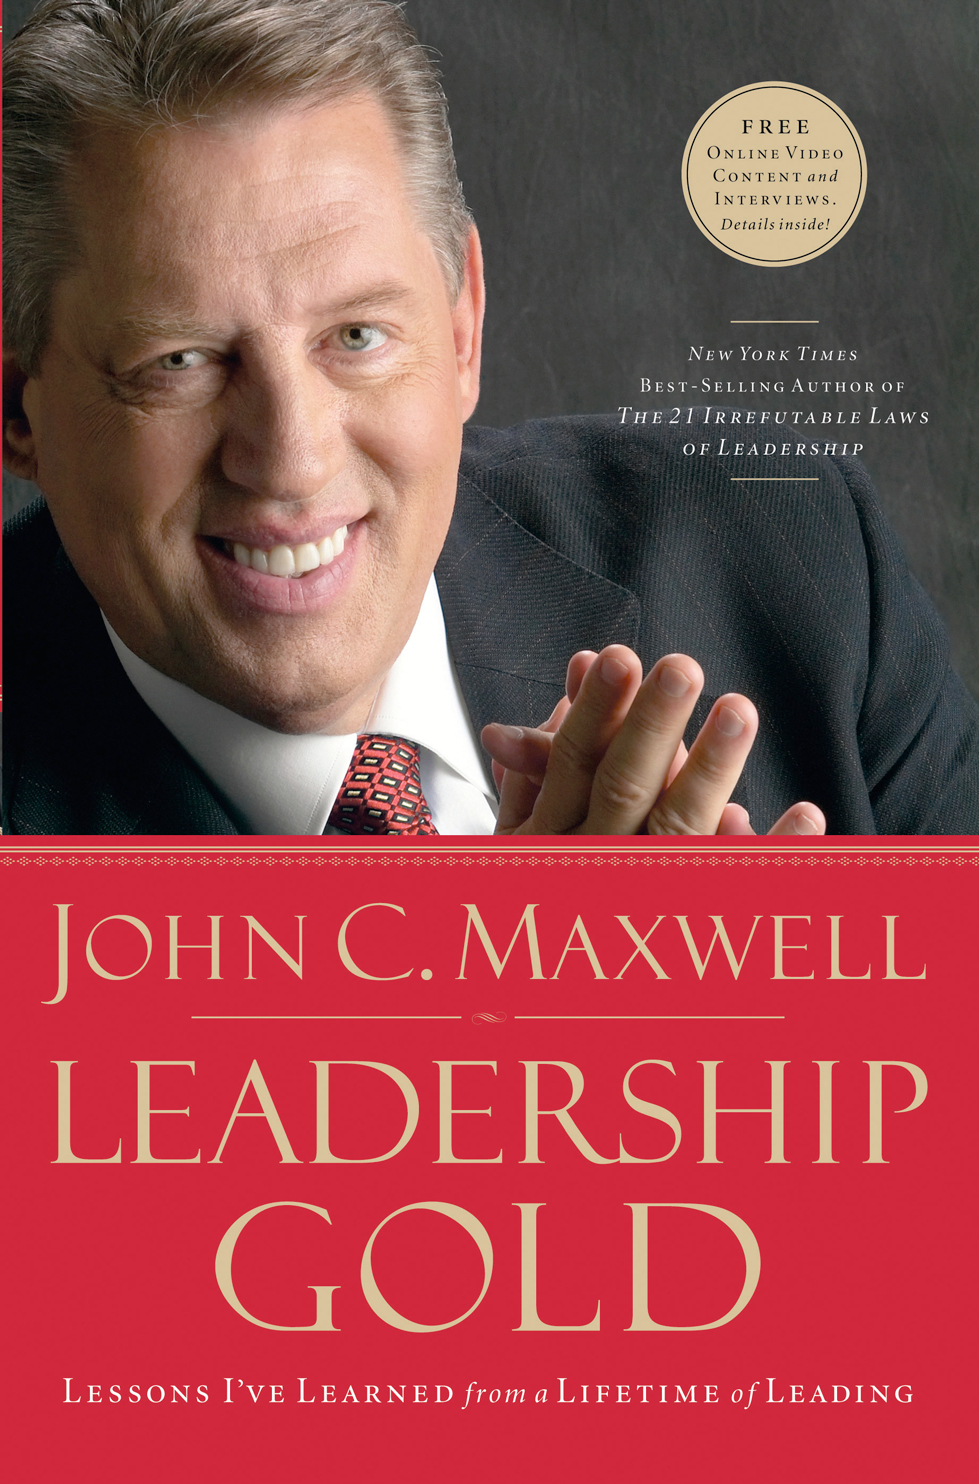 Leadership gold book cover